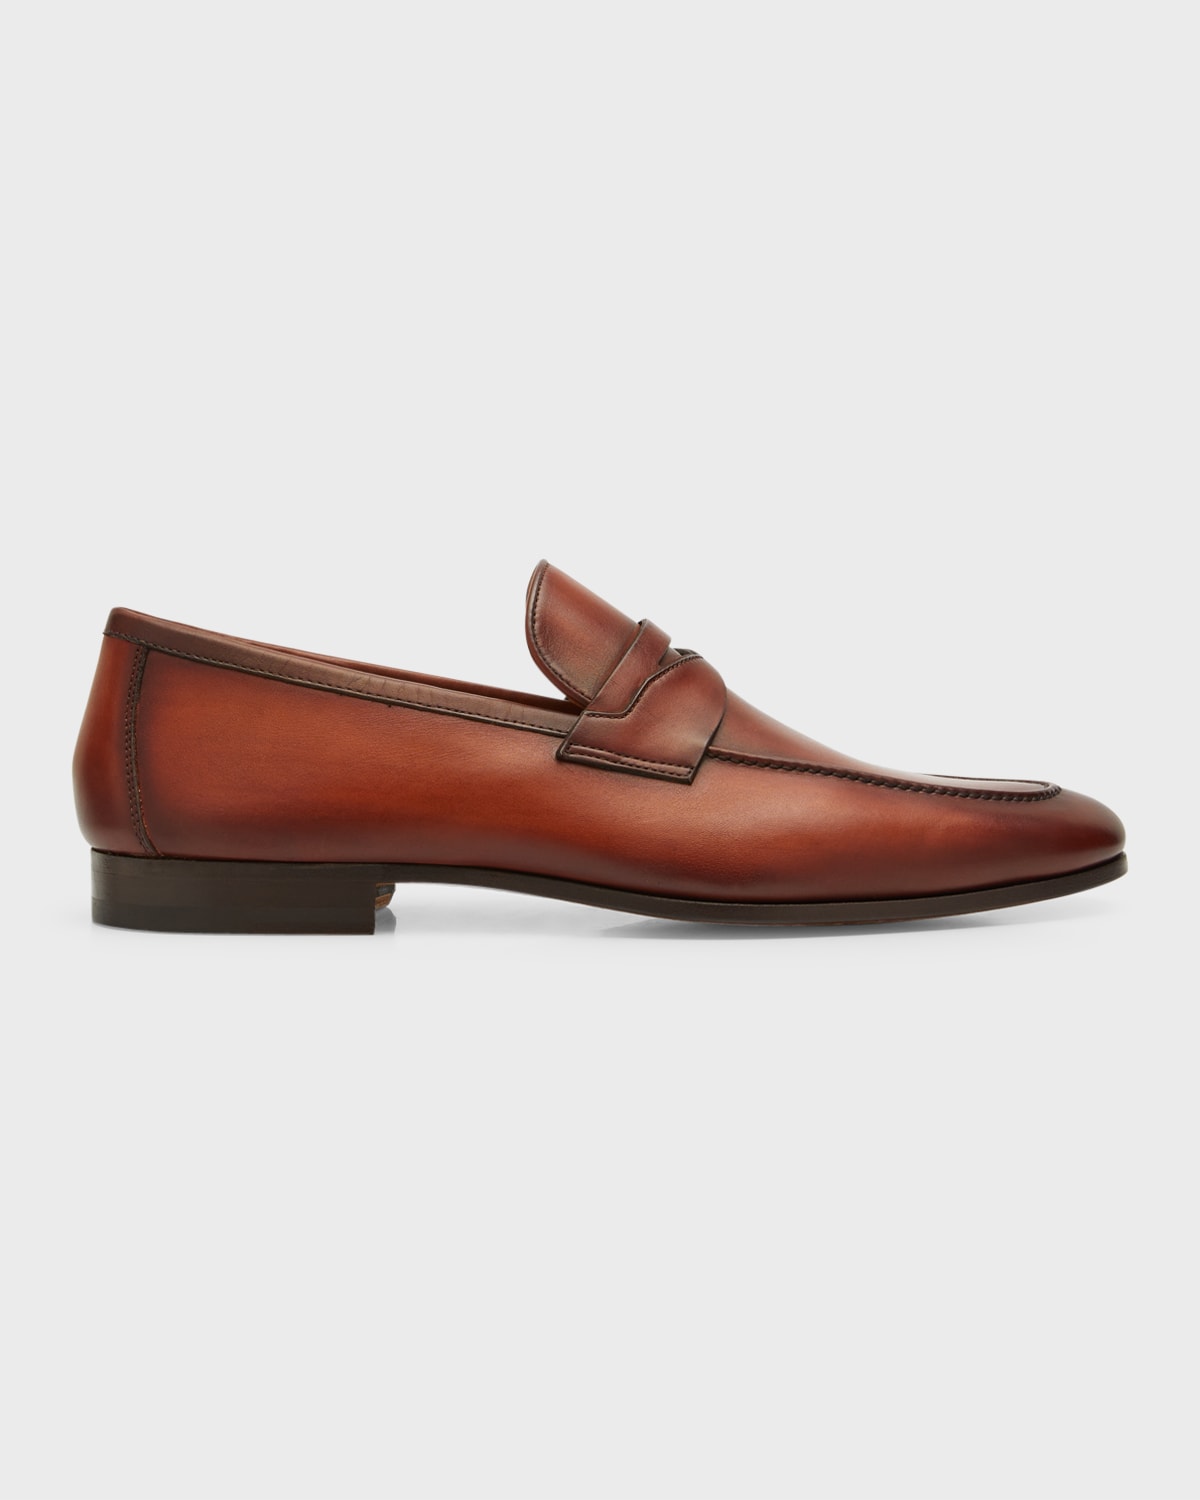 Magnanni Men's Sasso Leather Penny Loafers In Cognac